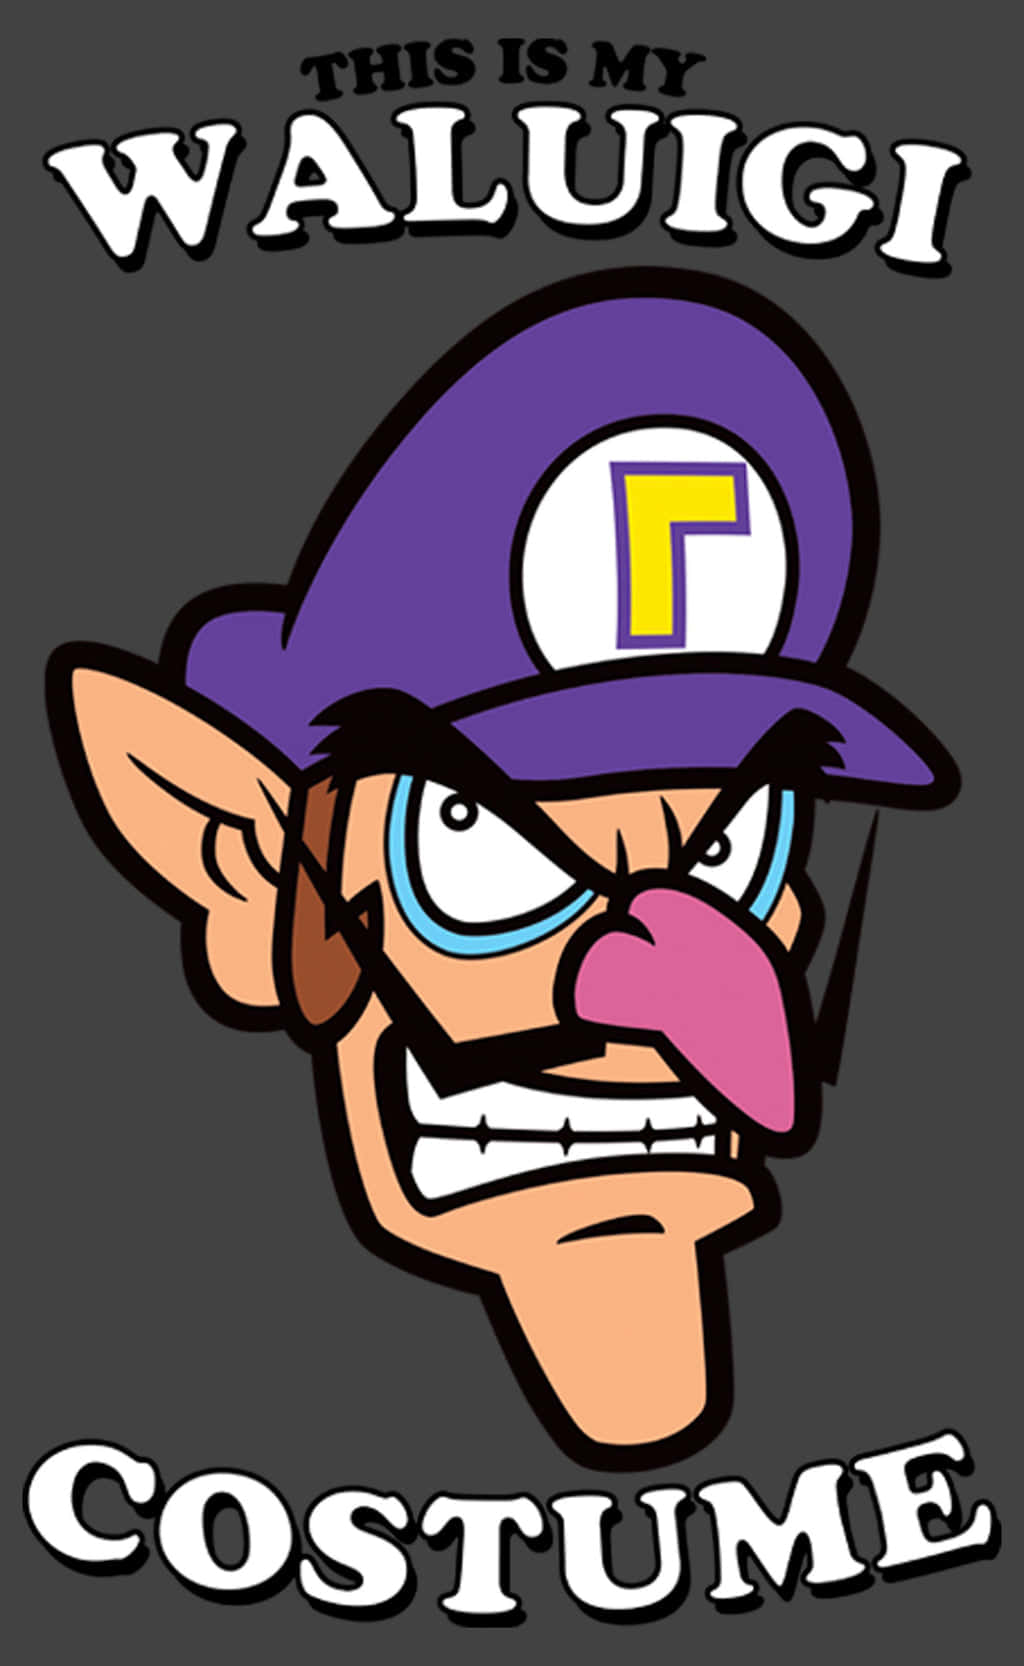 Caption: Waluigi Striking A Pose In His Iconic Purple Outfit